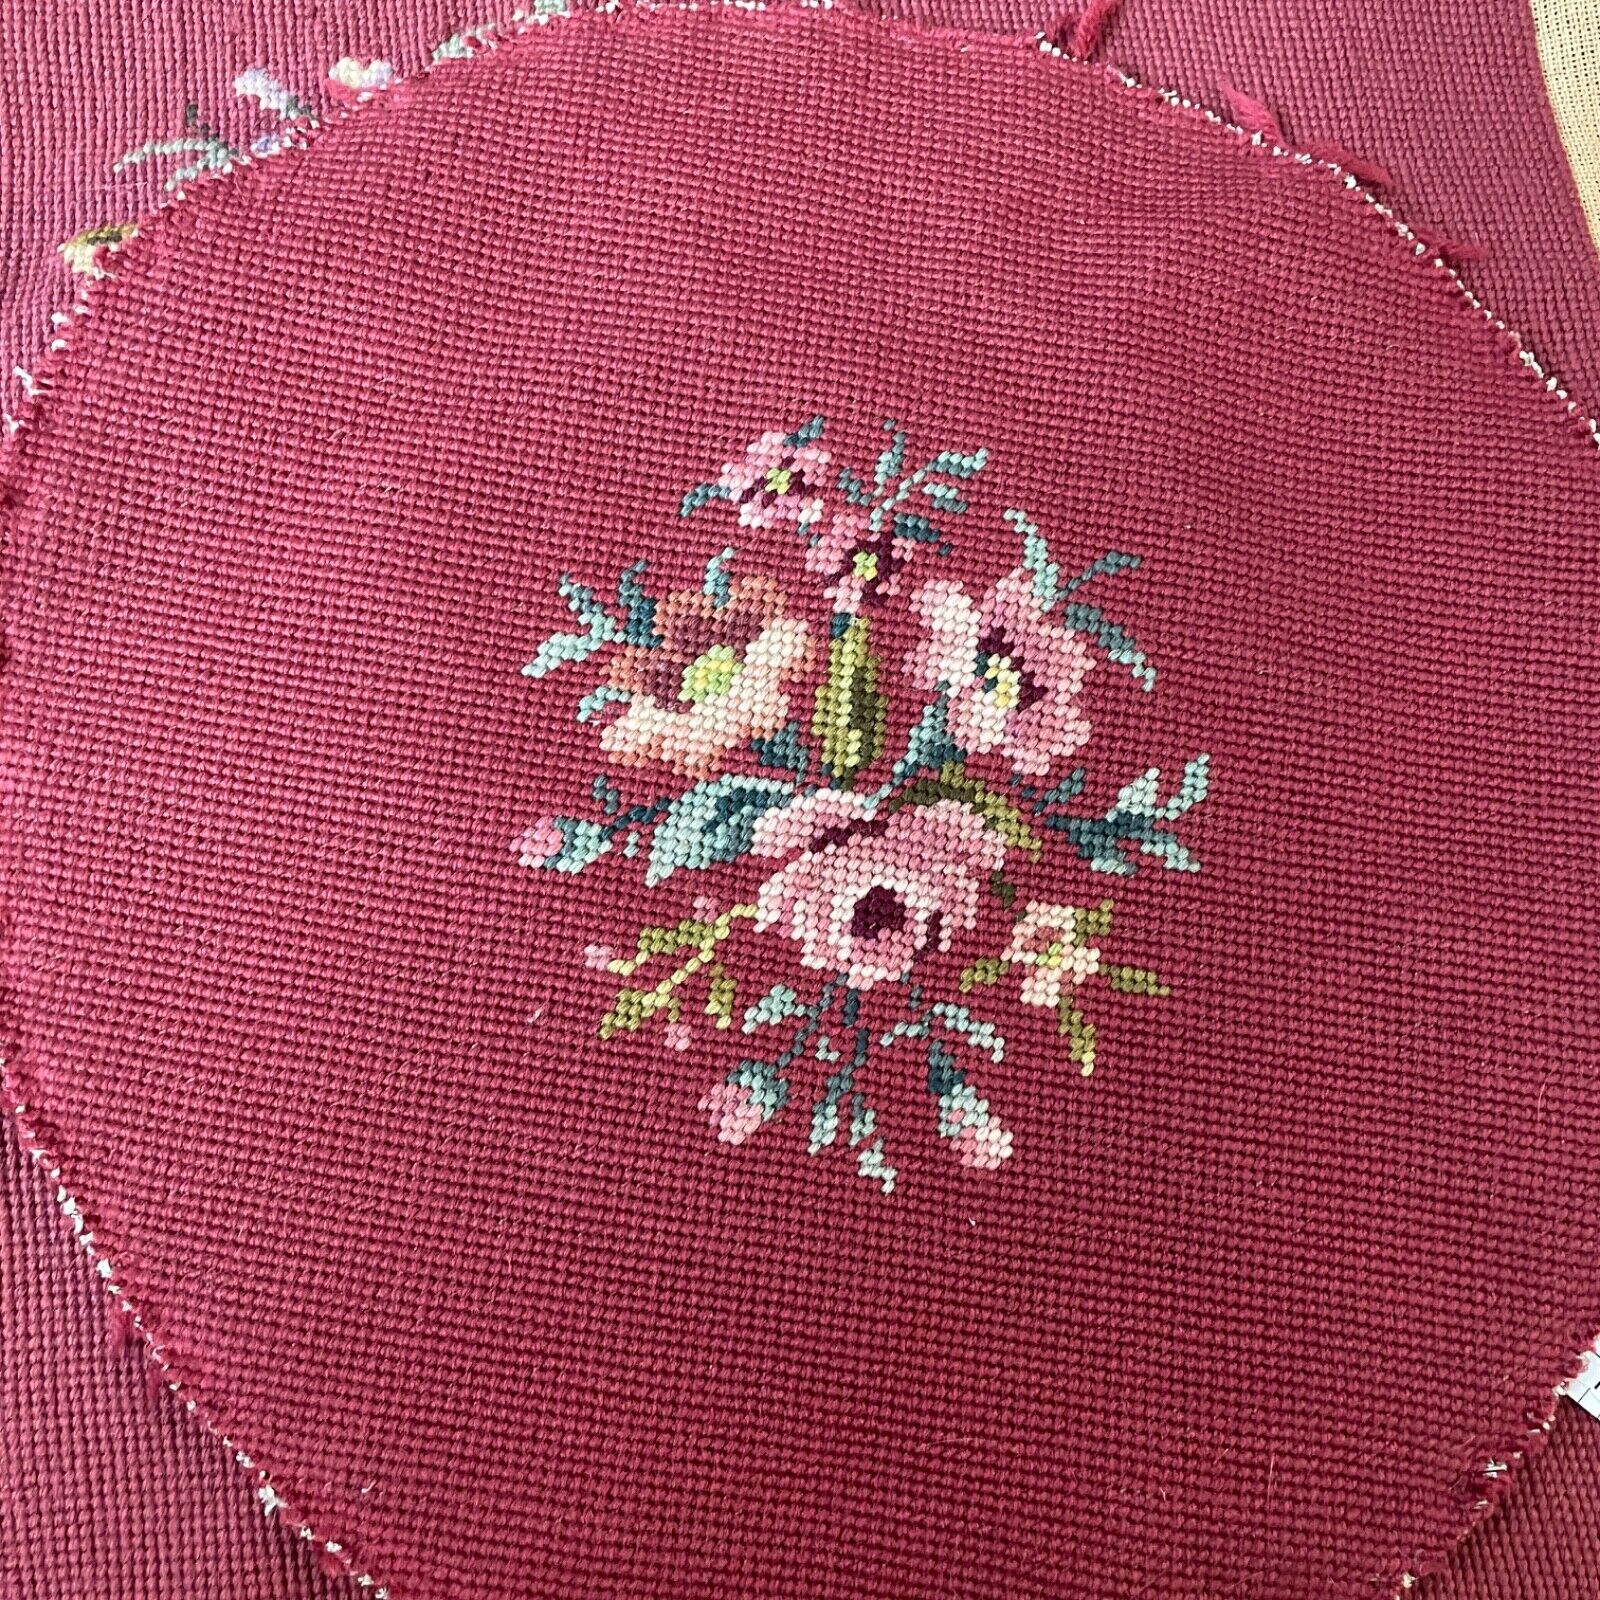 VTG 2 Needlepoint Completed Wine Burgundy Bkgd Floral 14 Circles For Pillows